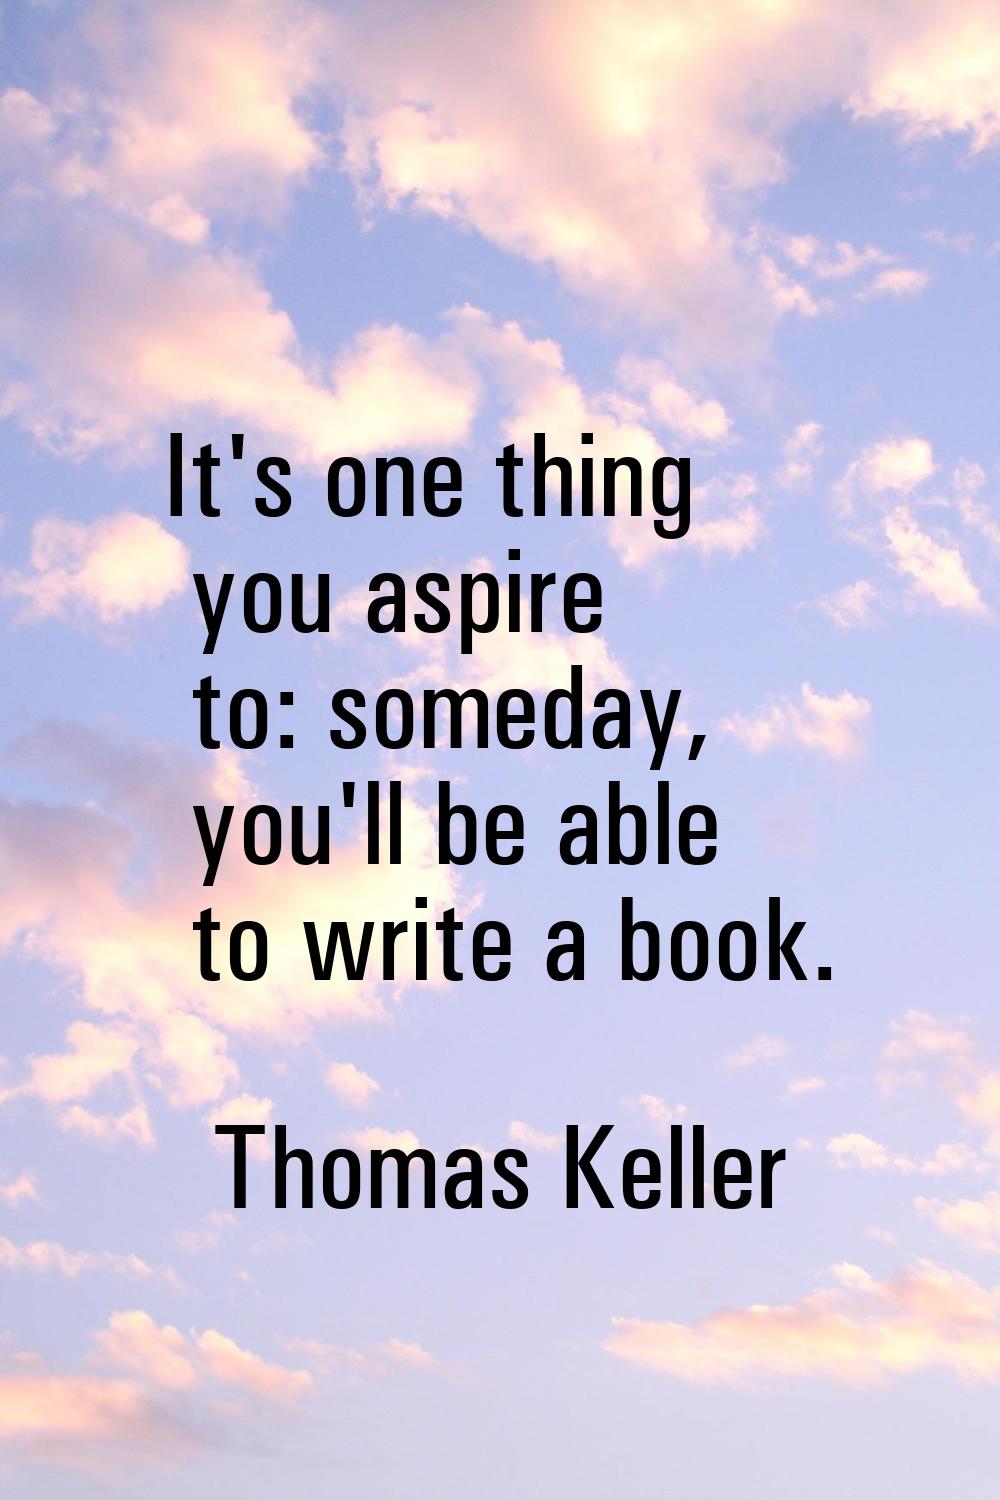 It's one thing you aspire to: someday, you'll be able to write a book.